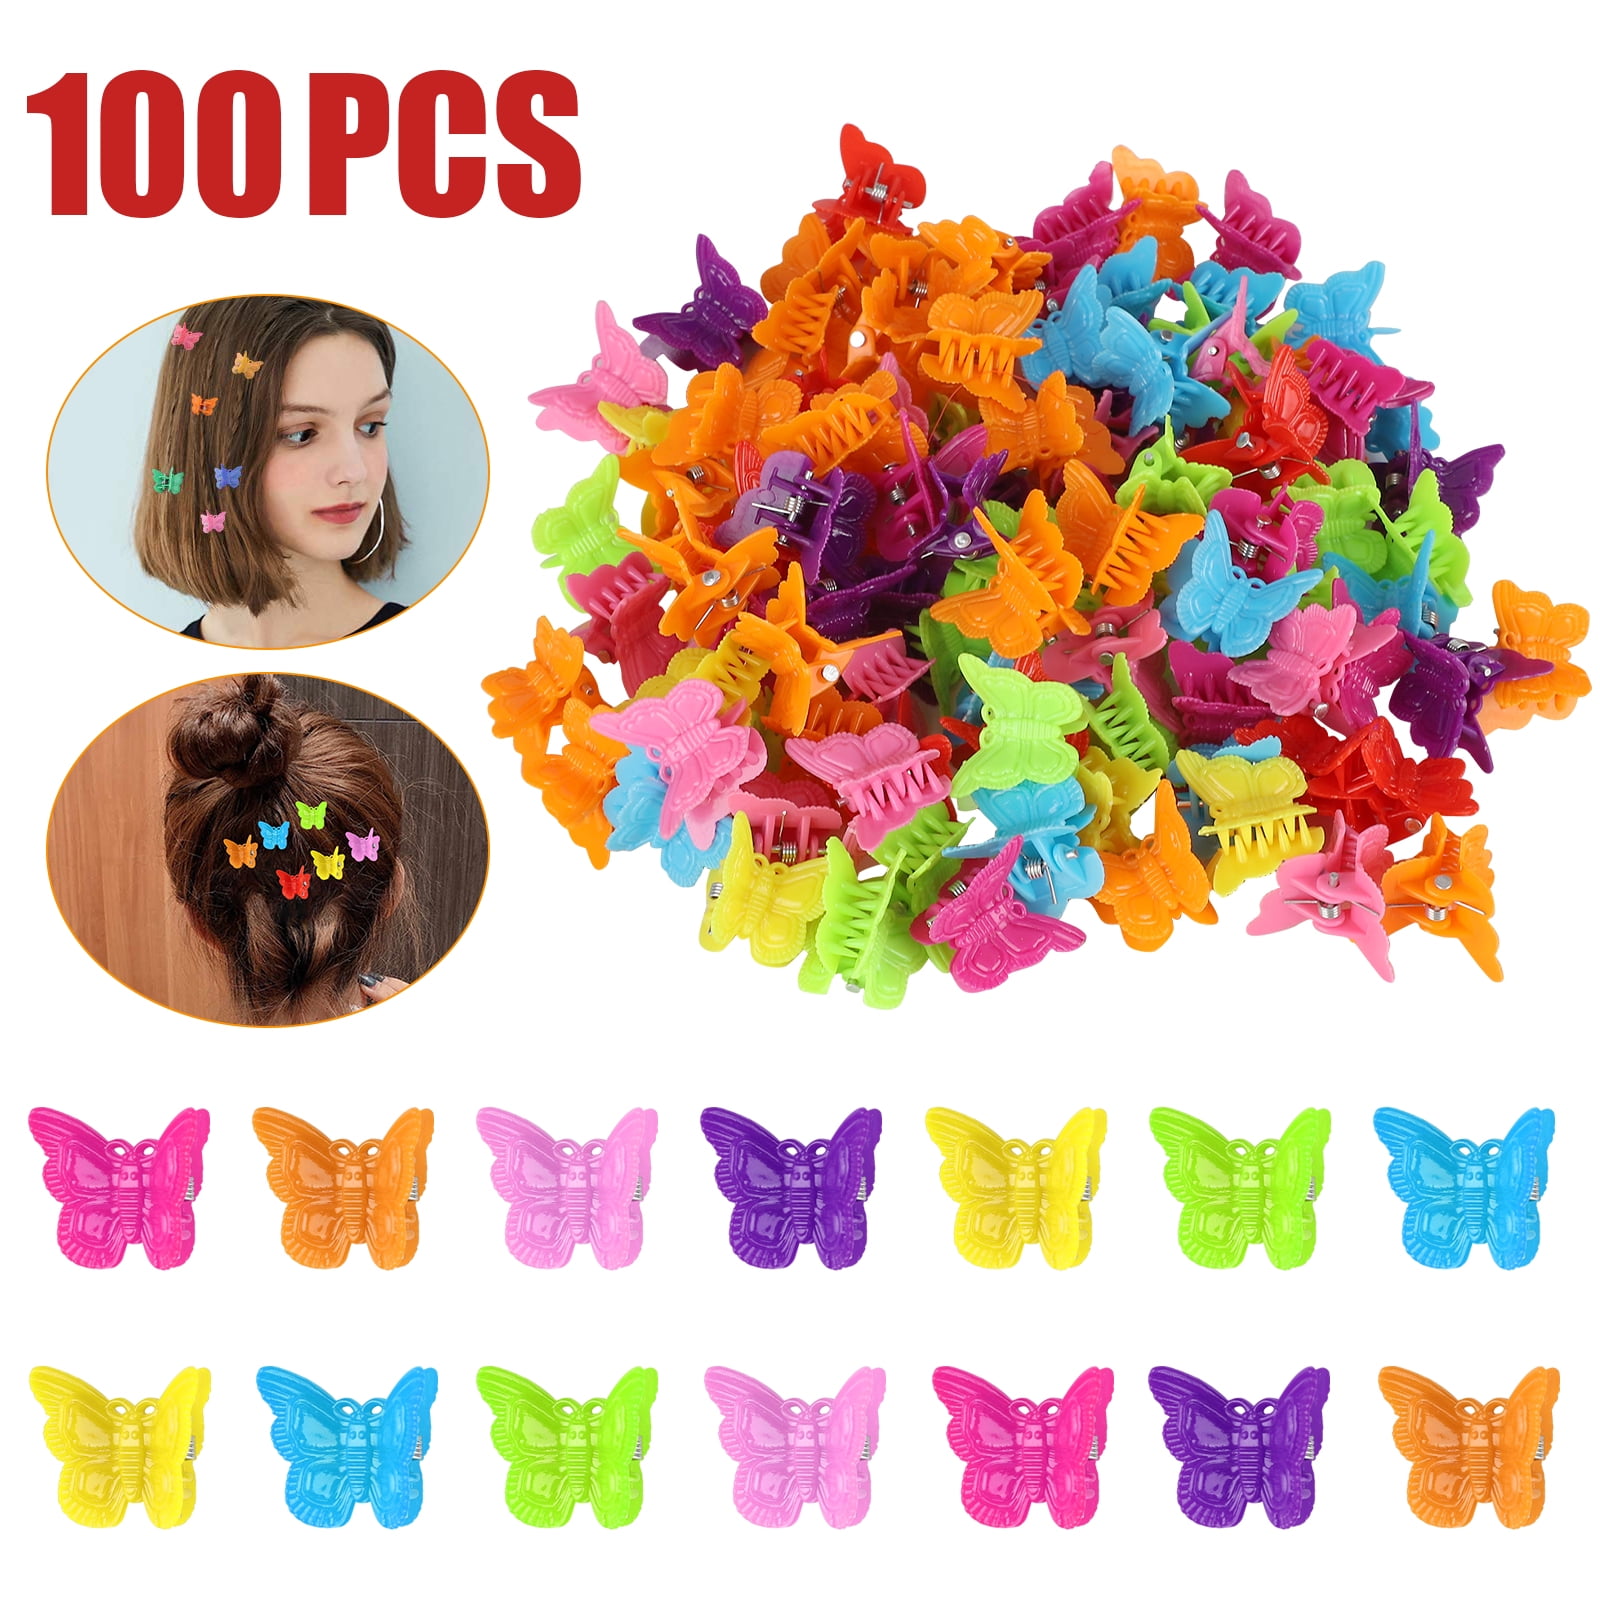 100 PCS Small Hair Clips for Girls Mini Hair Claw Clips for Women